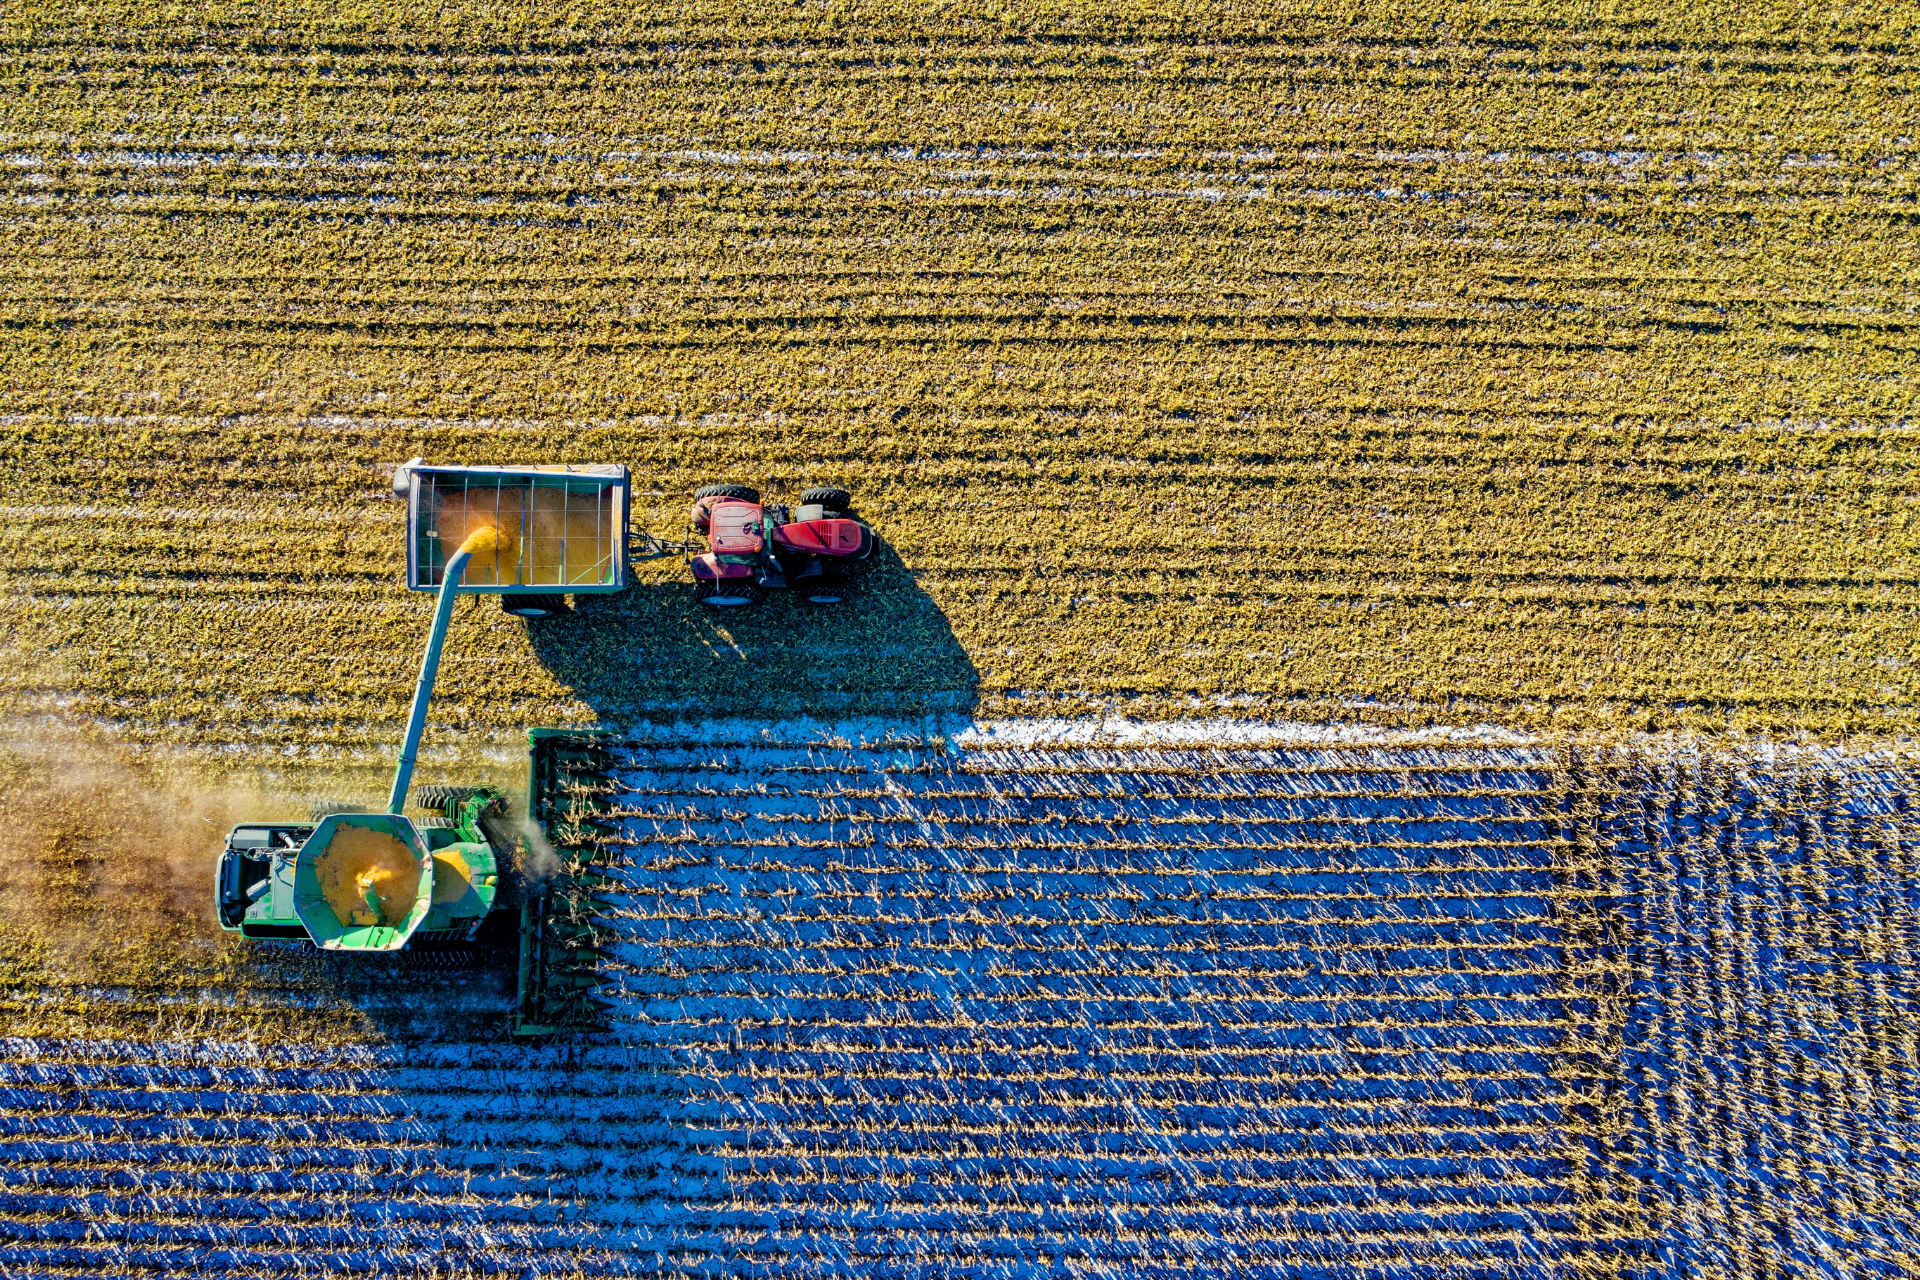 Bird’s eye view of a field in which a harvester is depositing crops into a trailer being pulled by a tractor